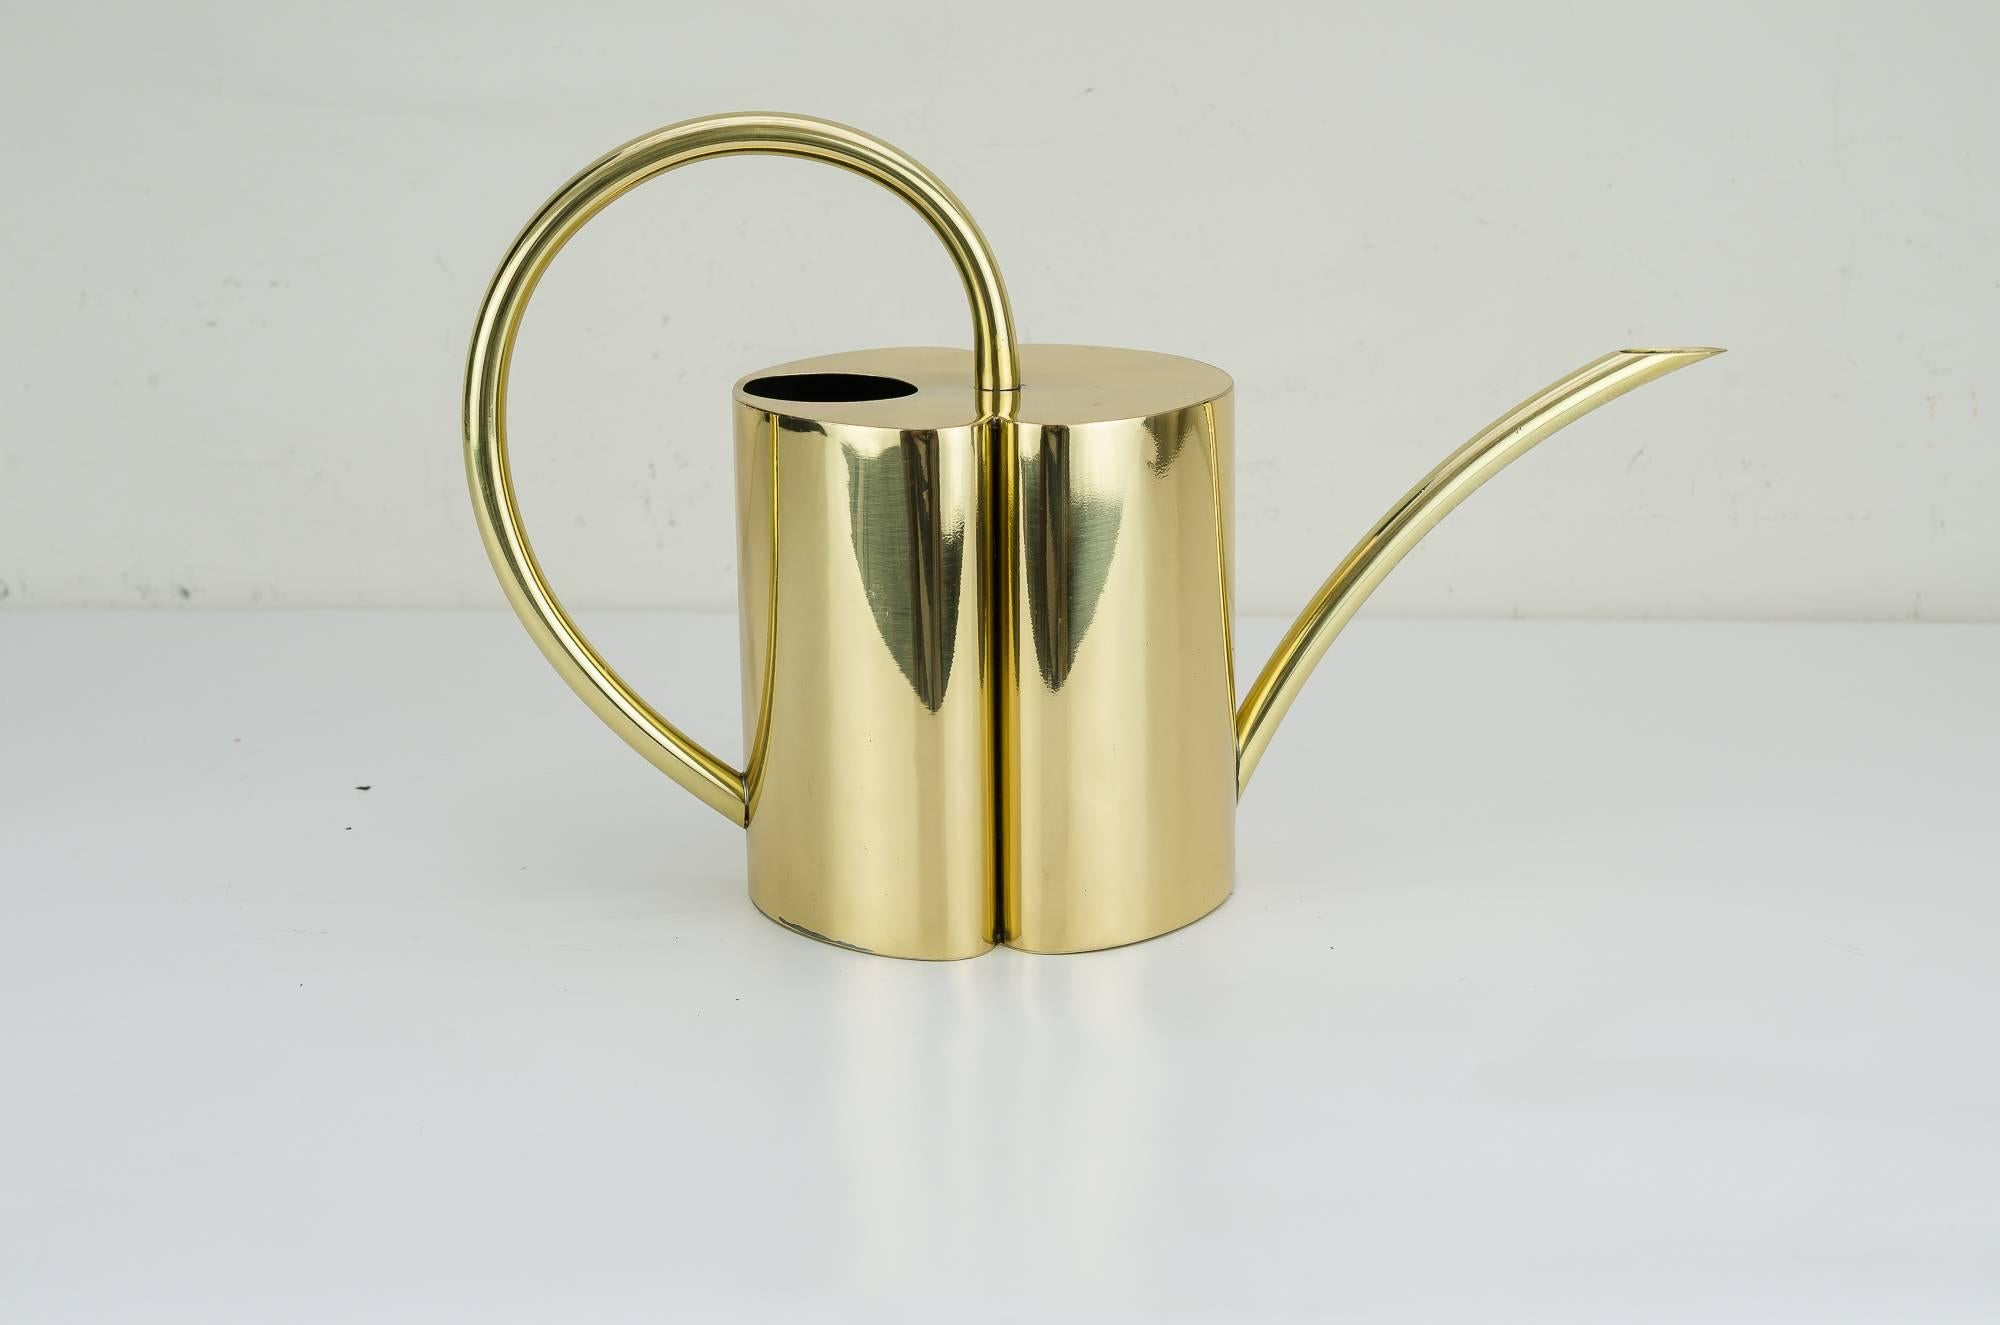 Watering Can, 1930s (Lackiert)